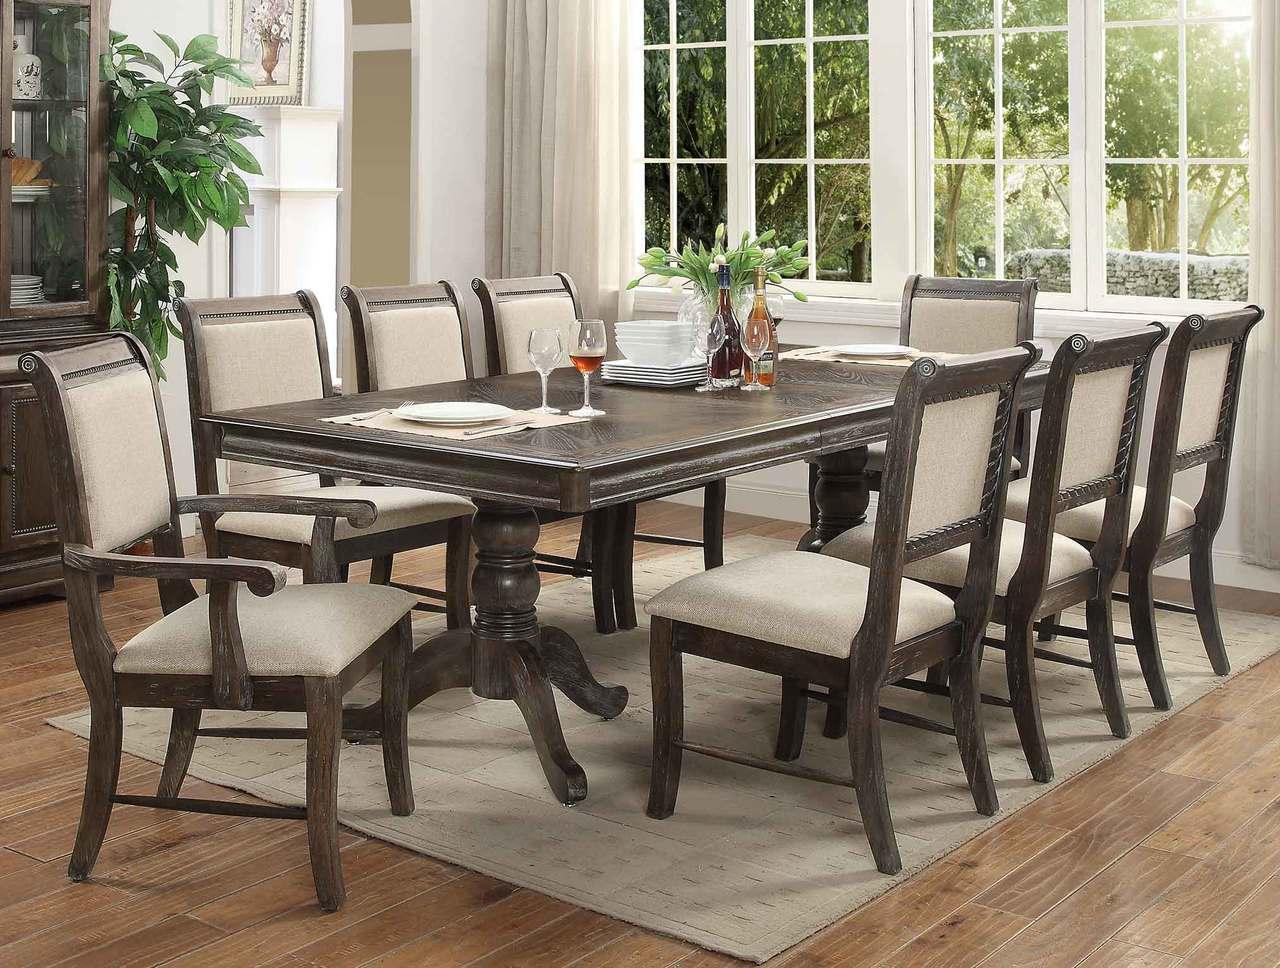 Traditional Dining Table Set Merlot 2147 2147-DT-Set-7 in Gray Fabric